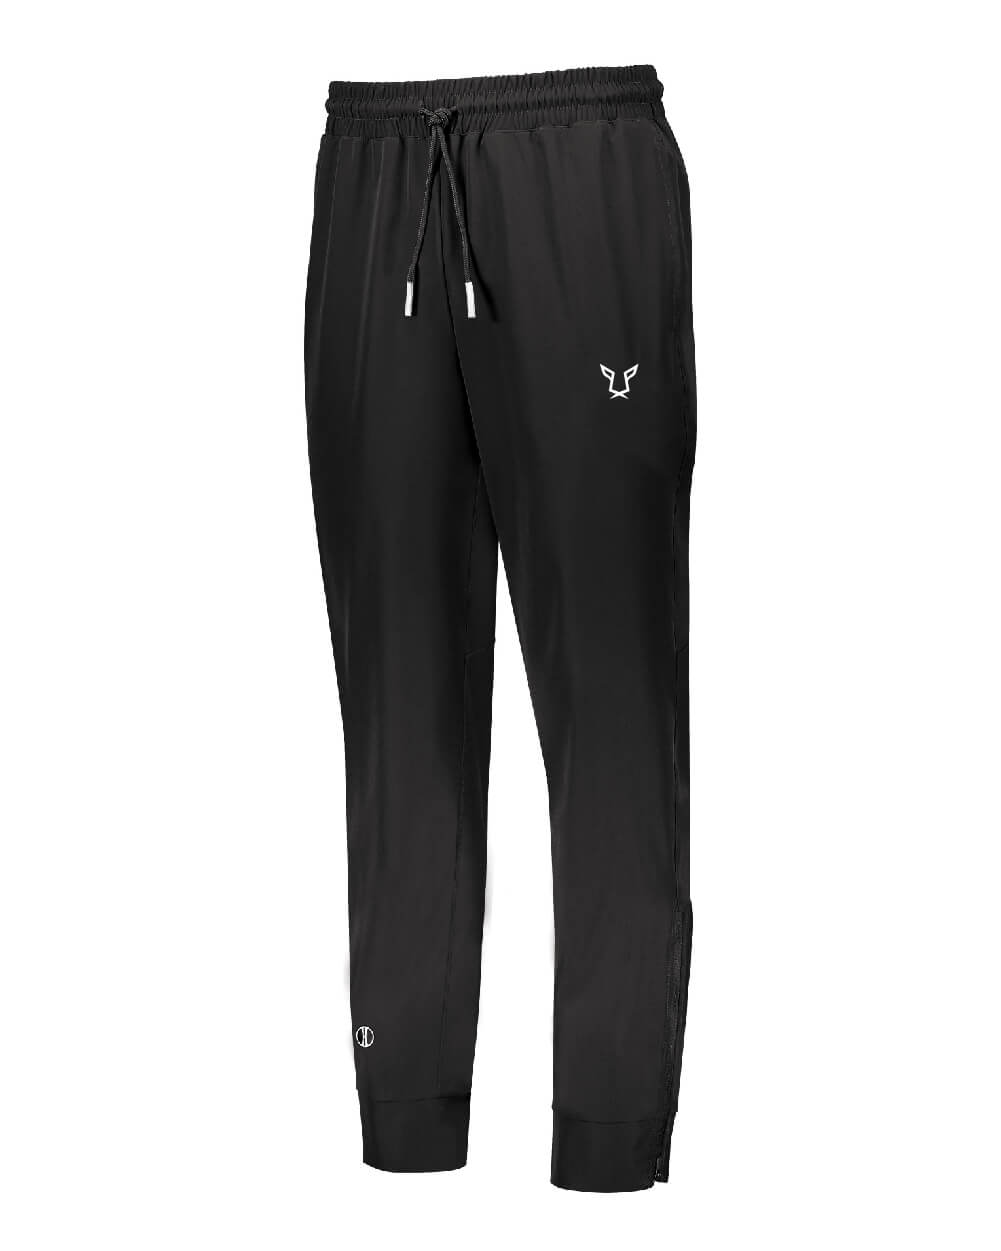 Men's Black Evolution Performance Joggers by Odisi Apparel